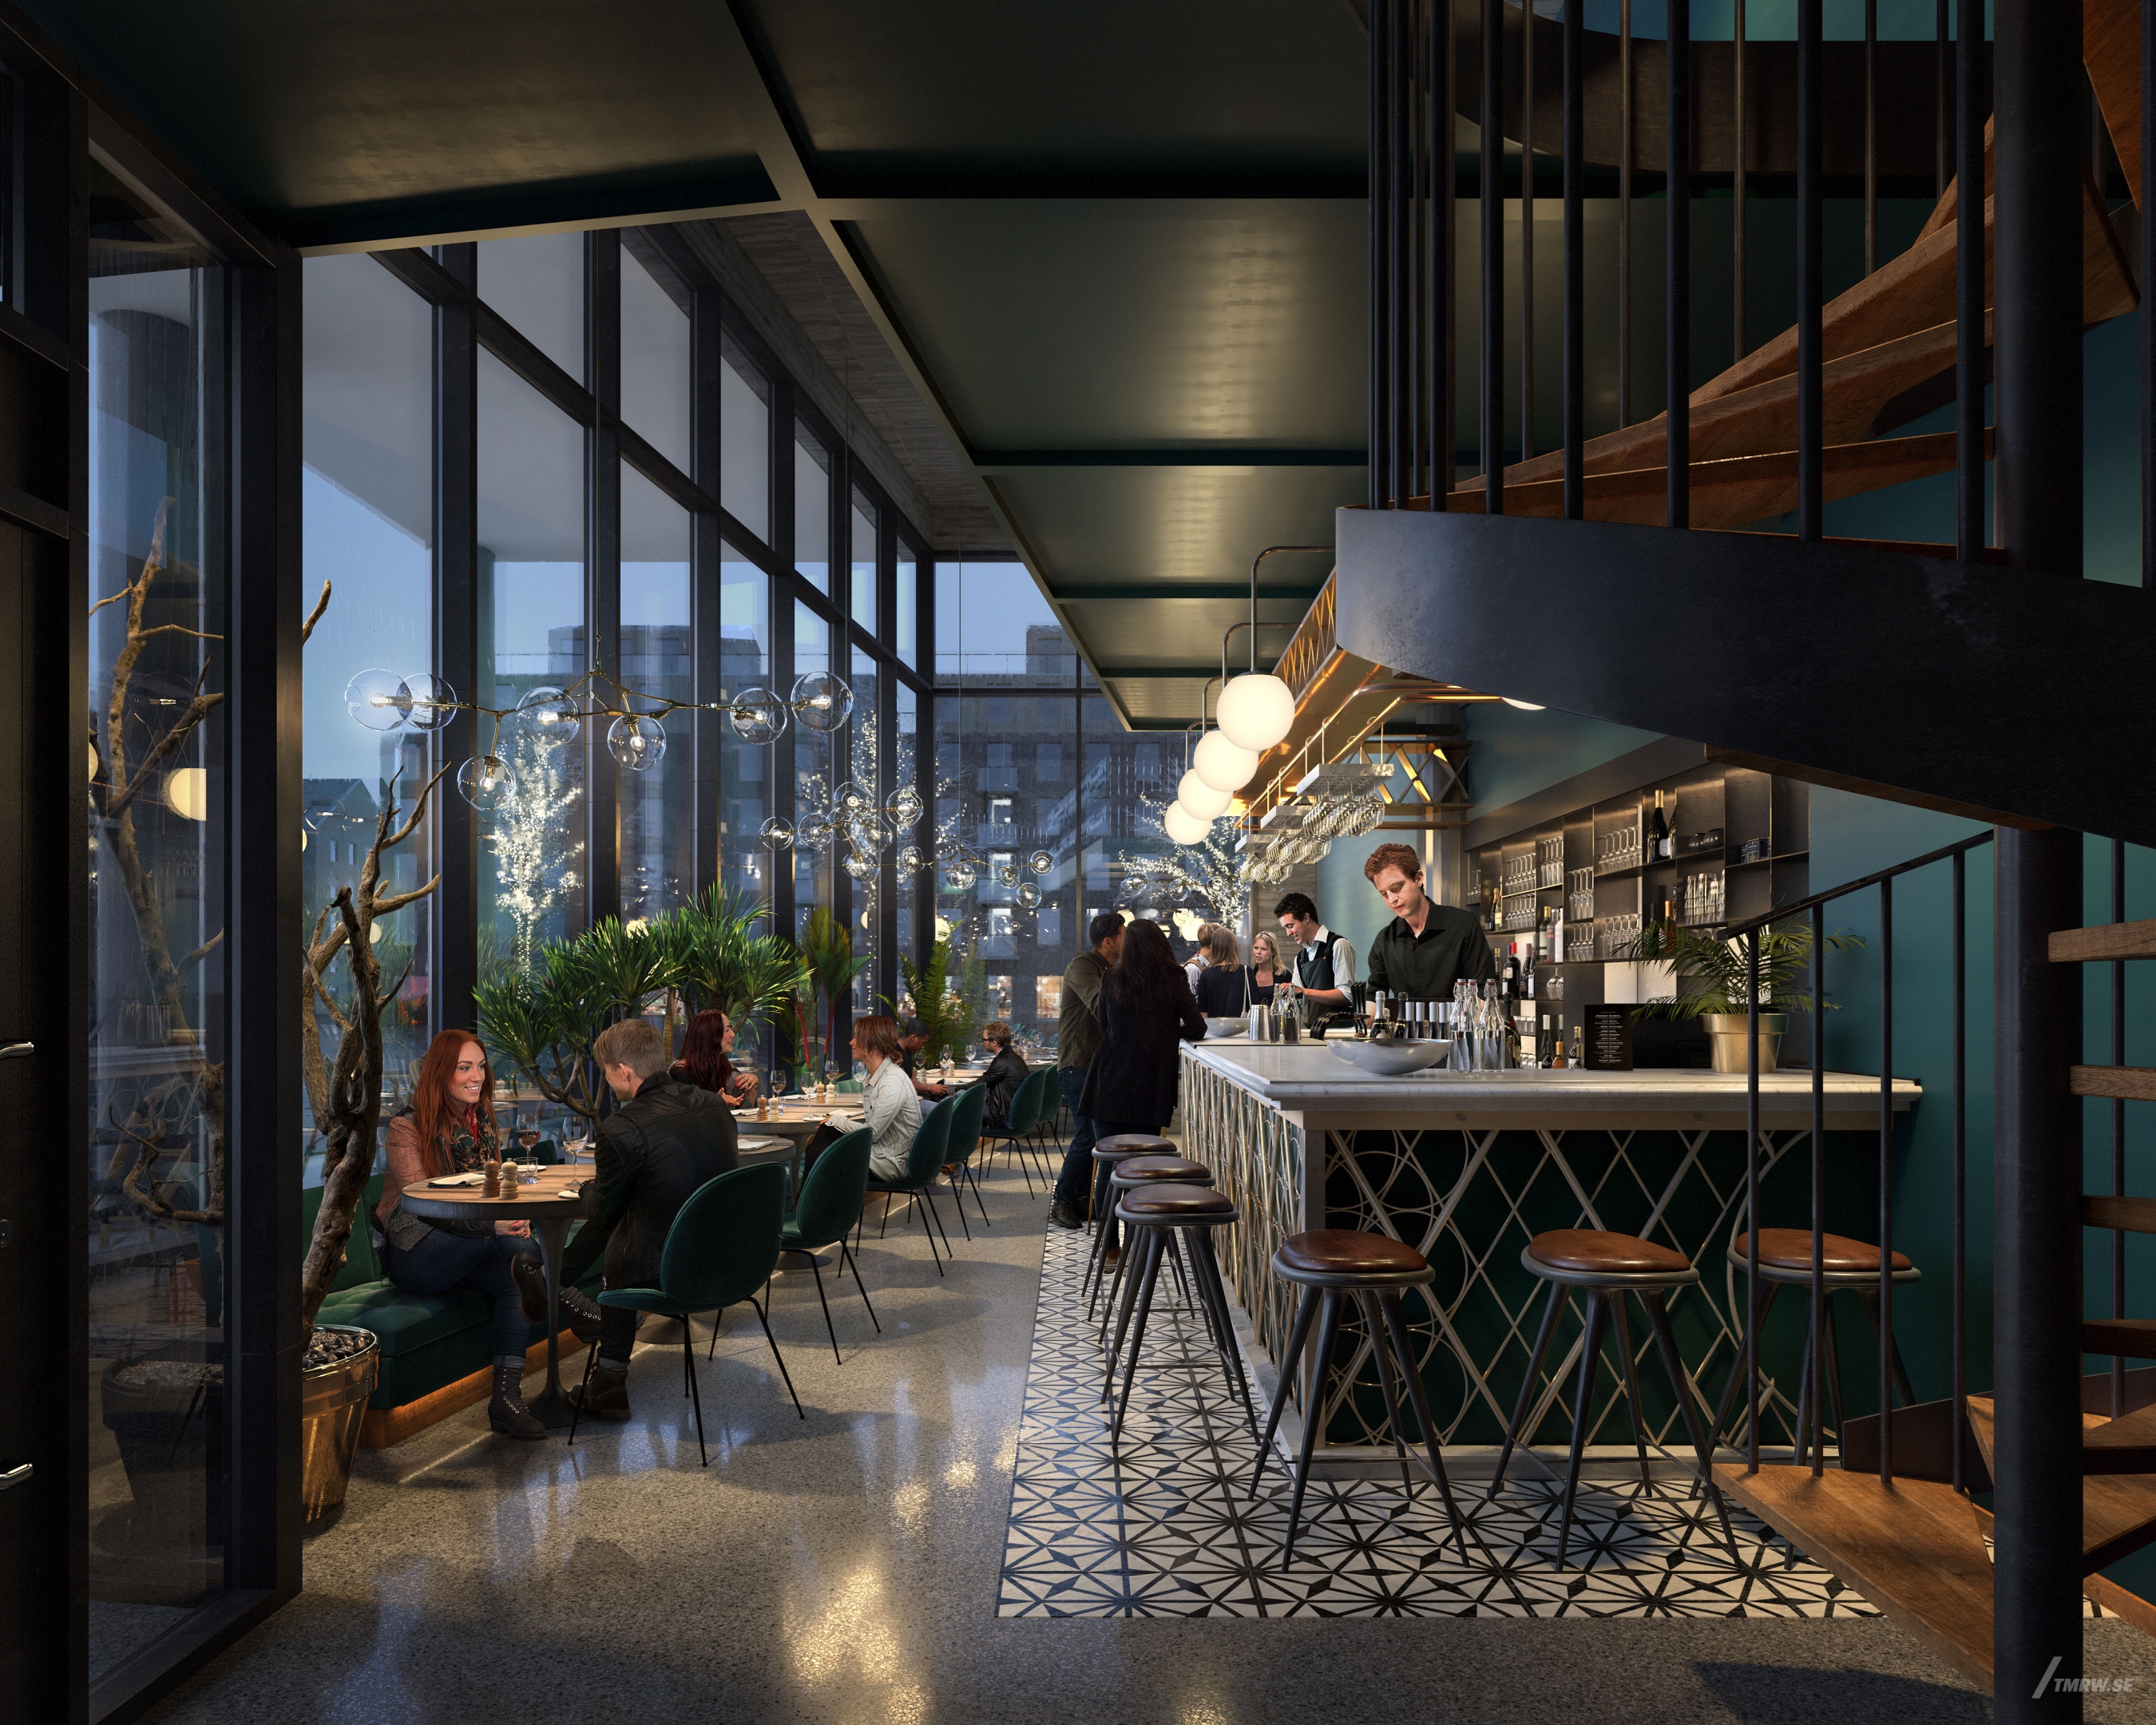 Architectural visualization of Hotell Lund for Veidekke. An image of the interior of a restaurant in a hotel building at night.